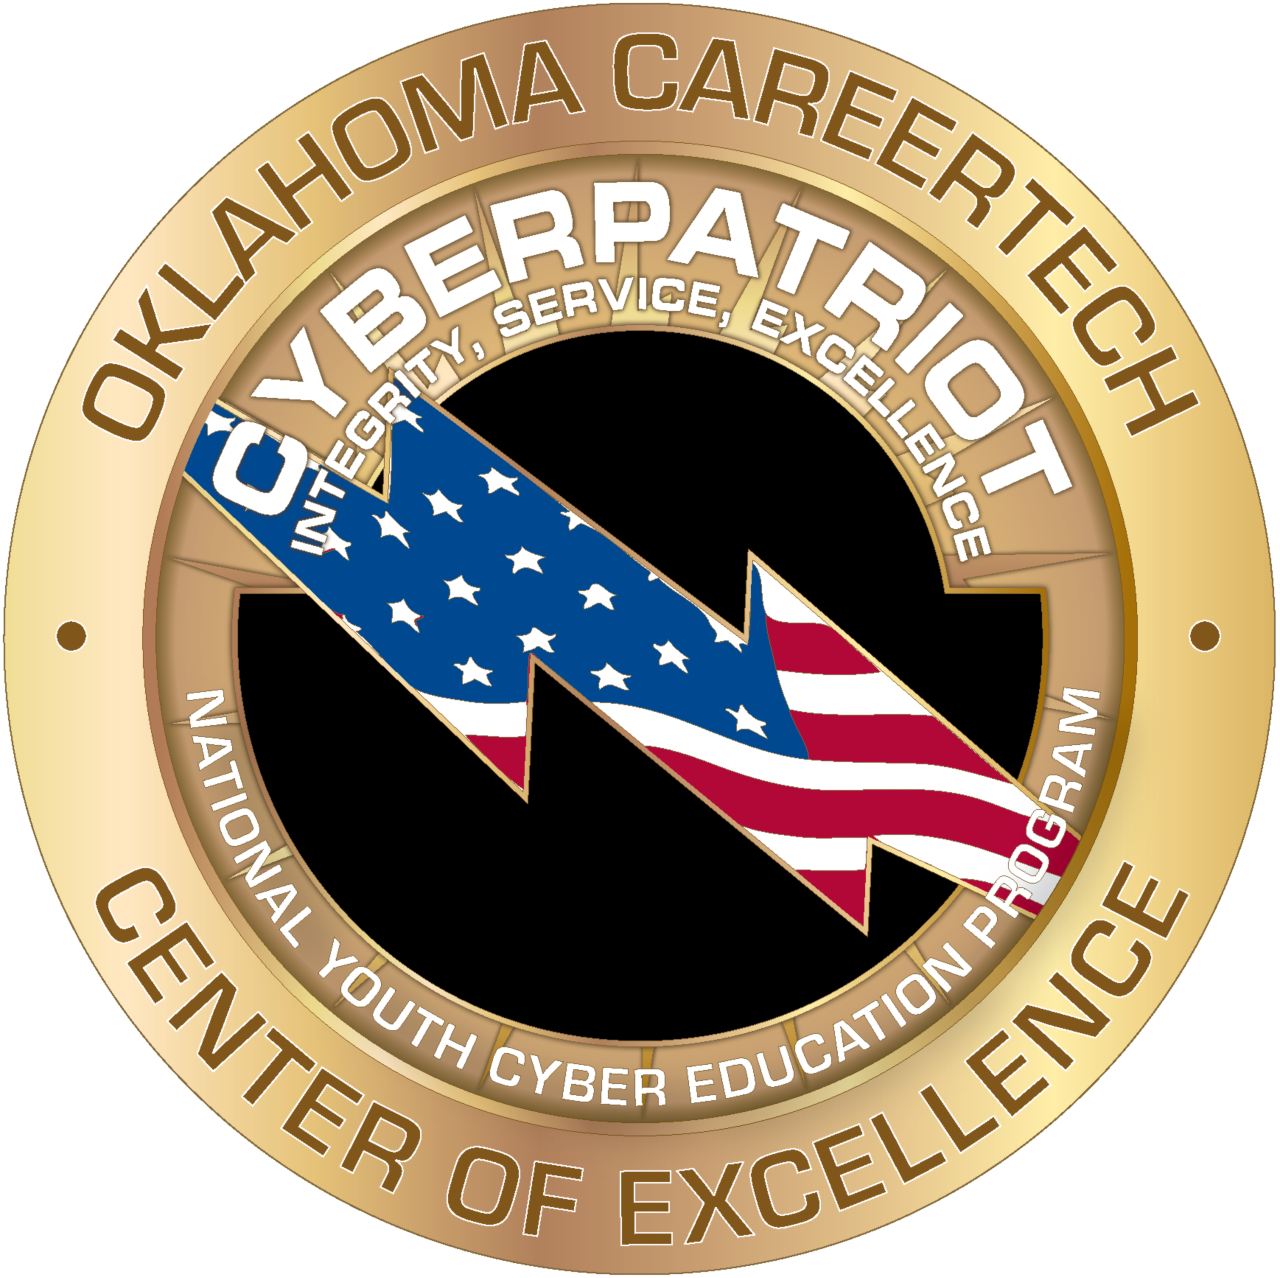 CyberPatriot Center of Excellence logo